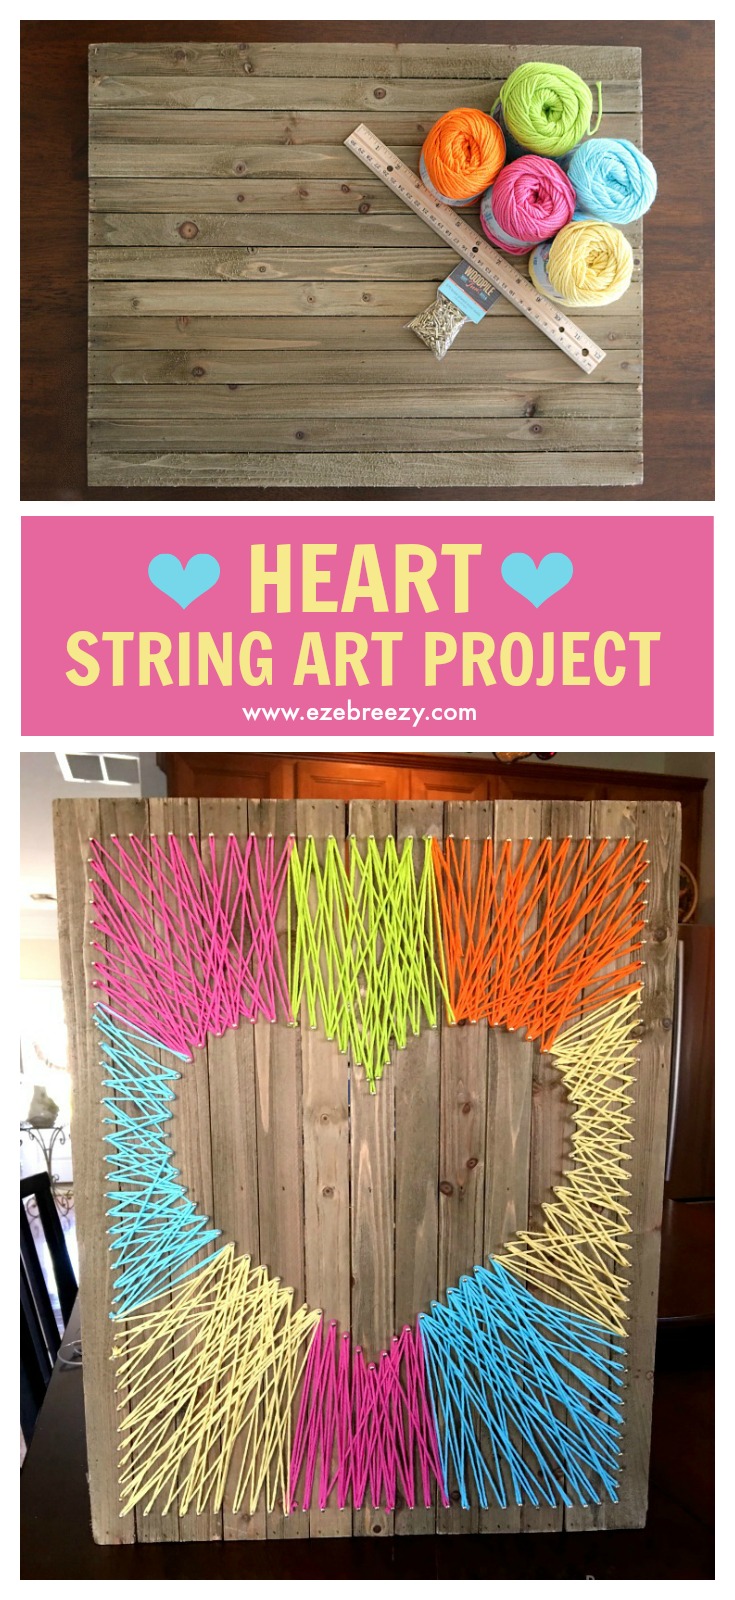 Easy, Fun and Colorful Heart String Art Craft that adds the perfect pop of color to any wall. | EZEBREEZY.COM | String Art Craft | String Craft | String Art Craft for Kids | String Art Activity | Craft for Kids | String Art Project